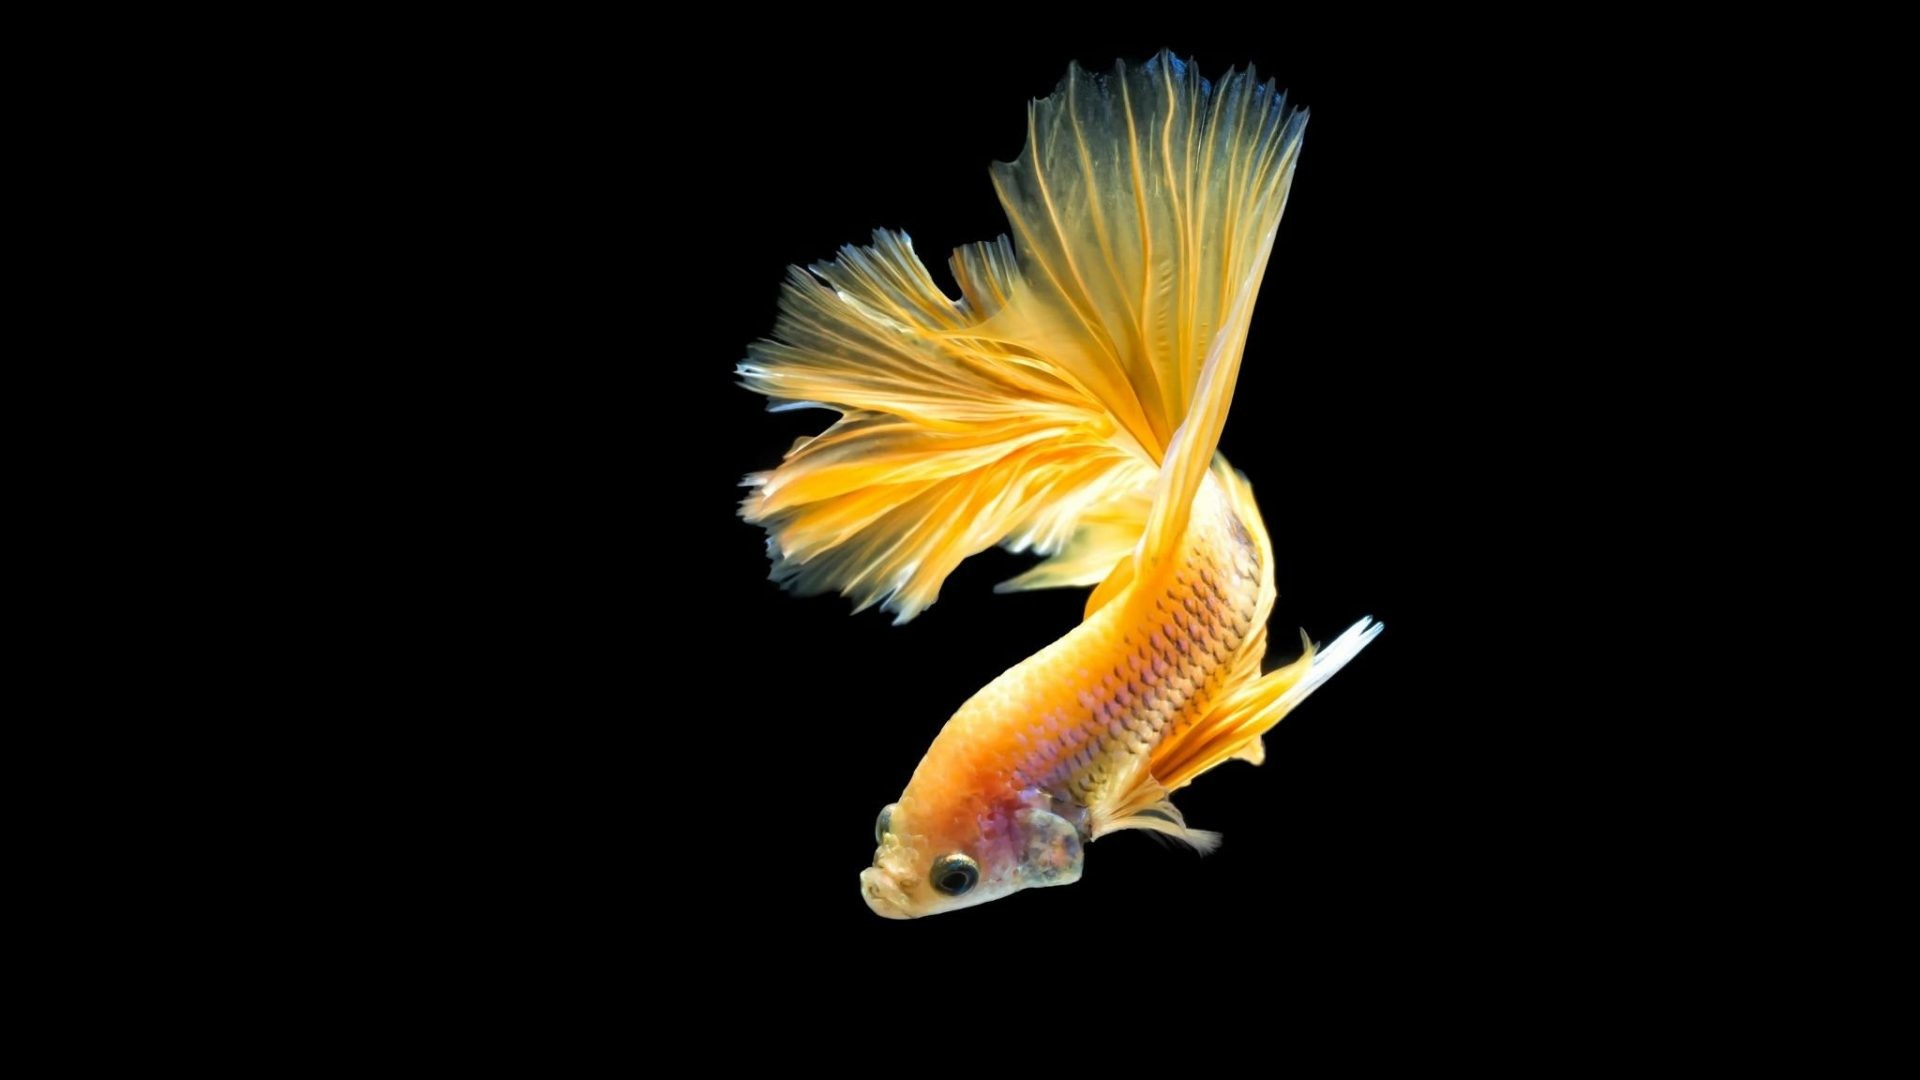 1920x1080 Fighting Tag - Fish Underwater Tropical Fighting Psychedelic Betta Siamese  Cute Goldfish Wallpaper for HD 16